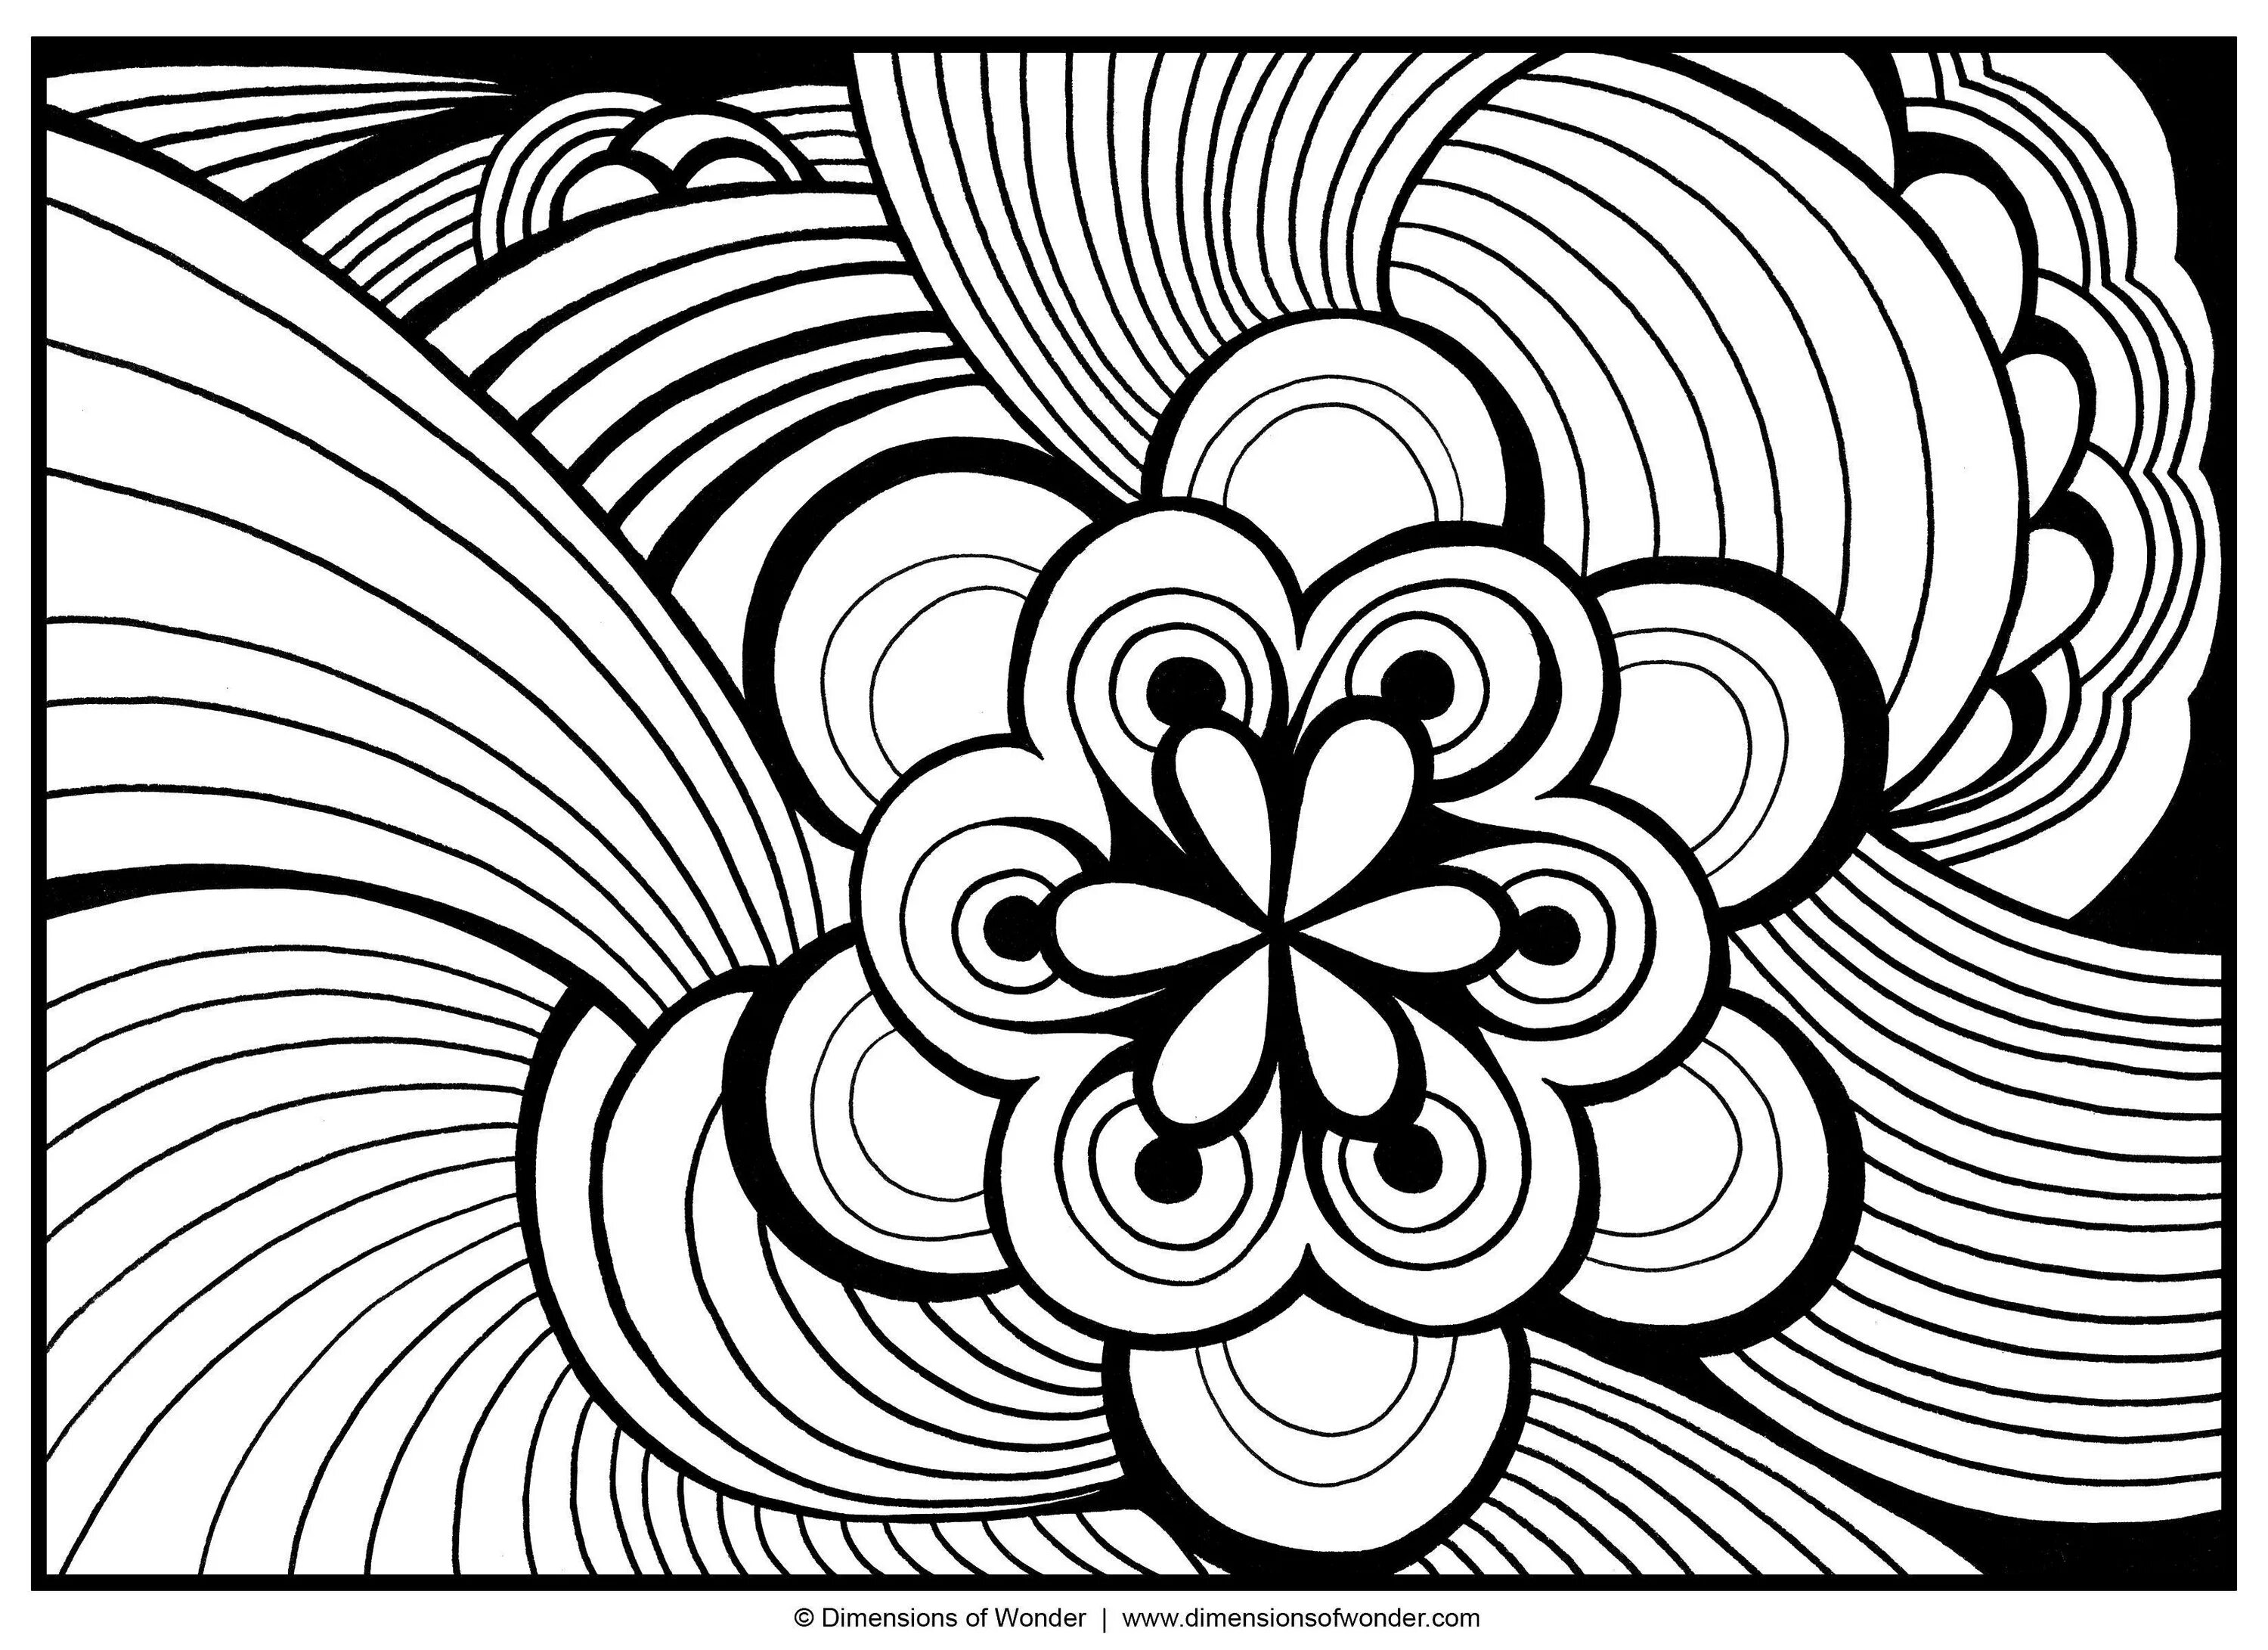 Dazzling simple coloring book for adults